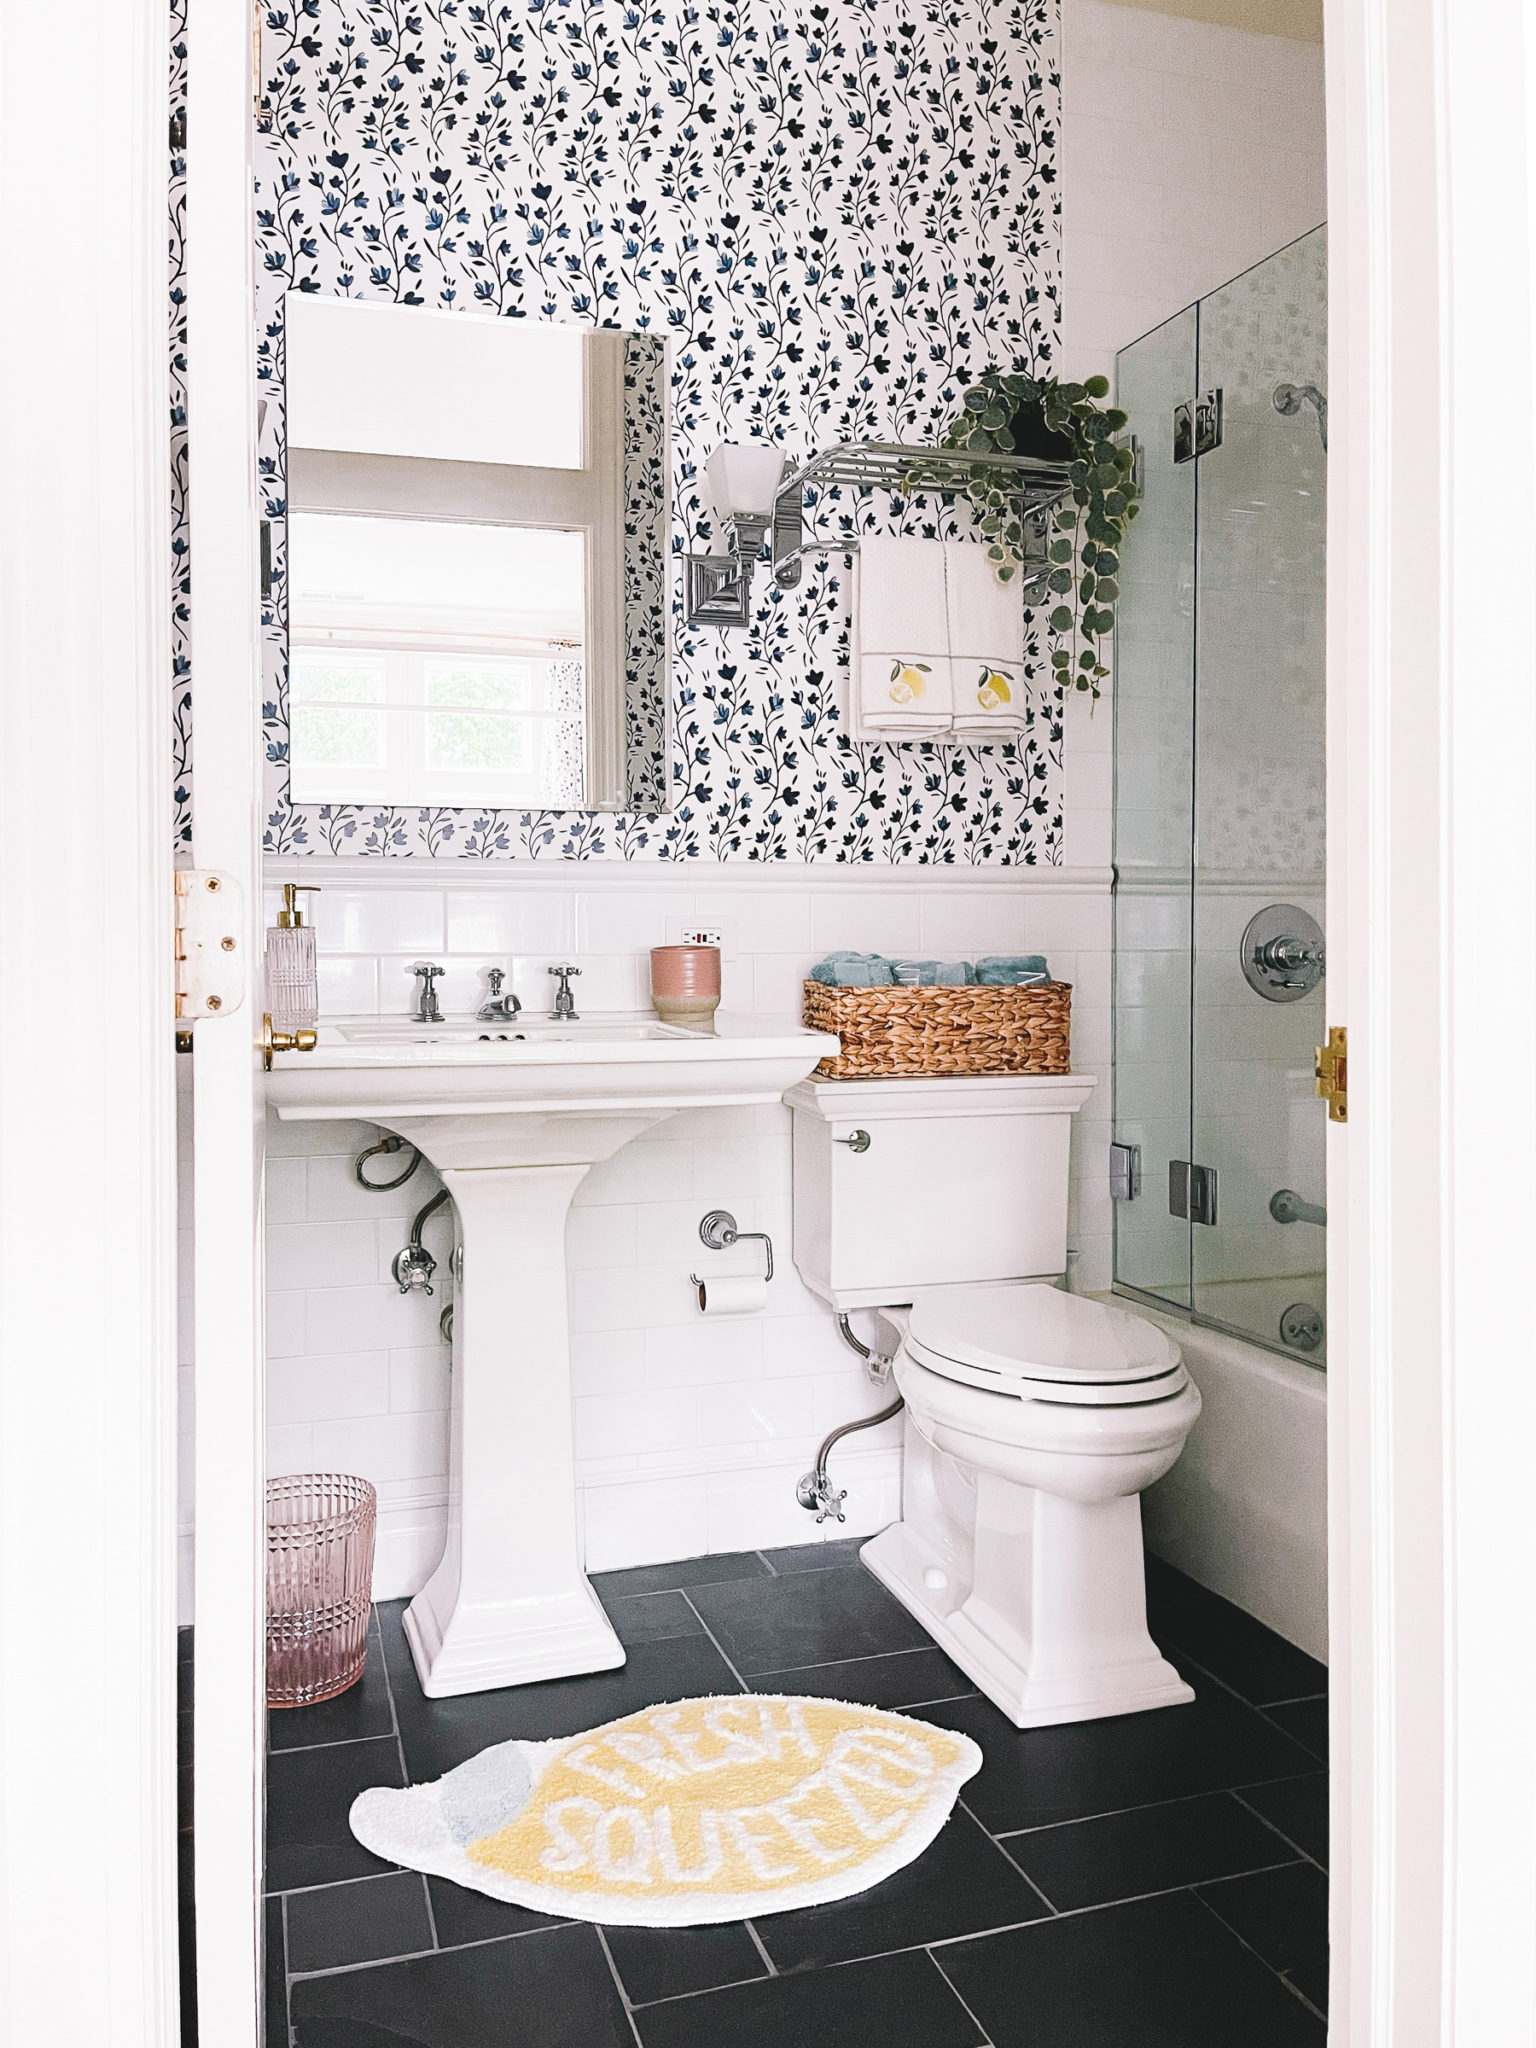 Lucy's Lemon Bathroom | Kelly in the City | Lifestyle Blog